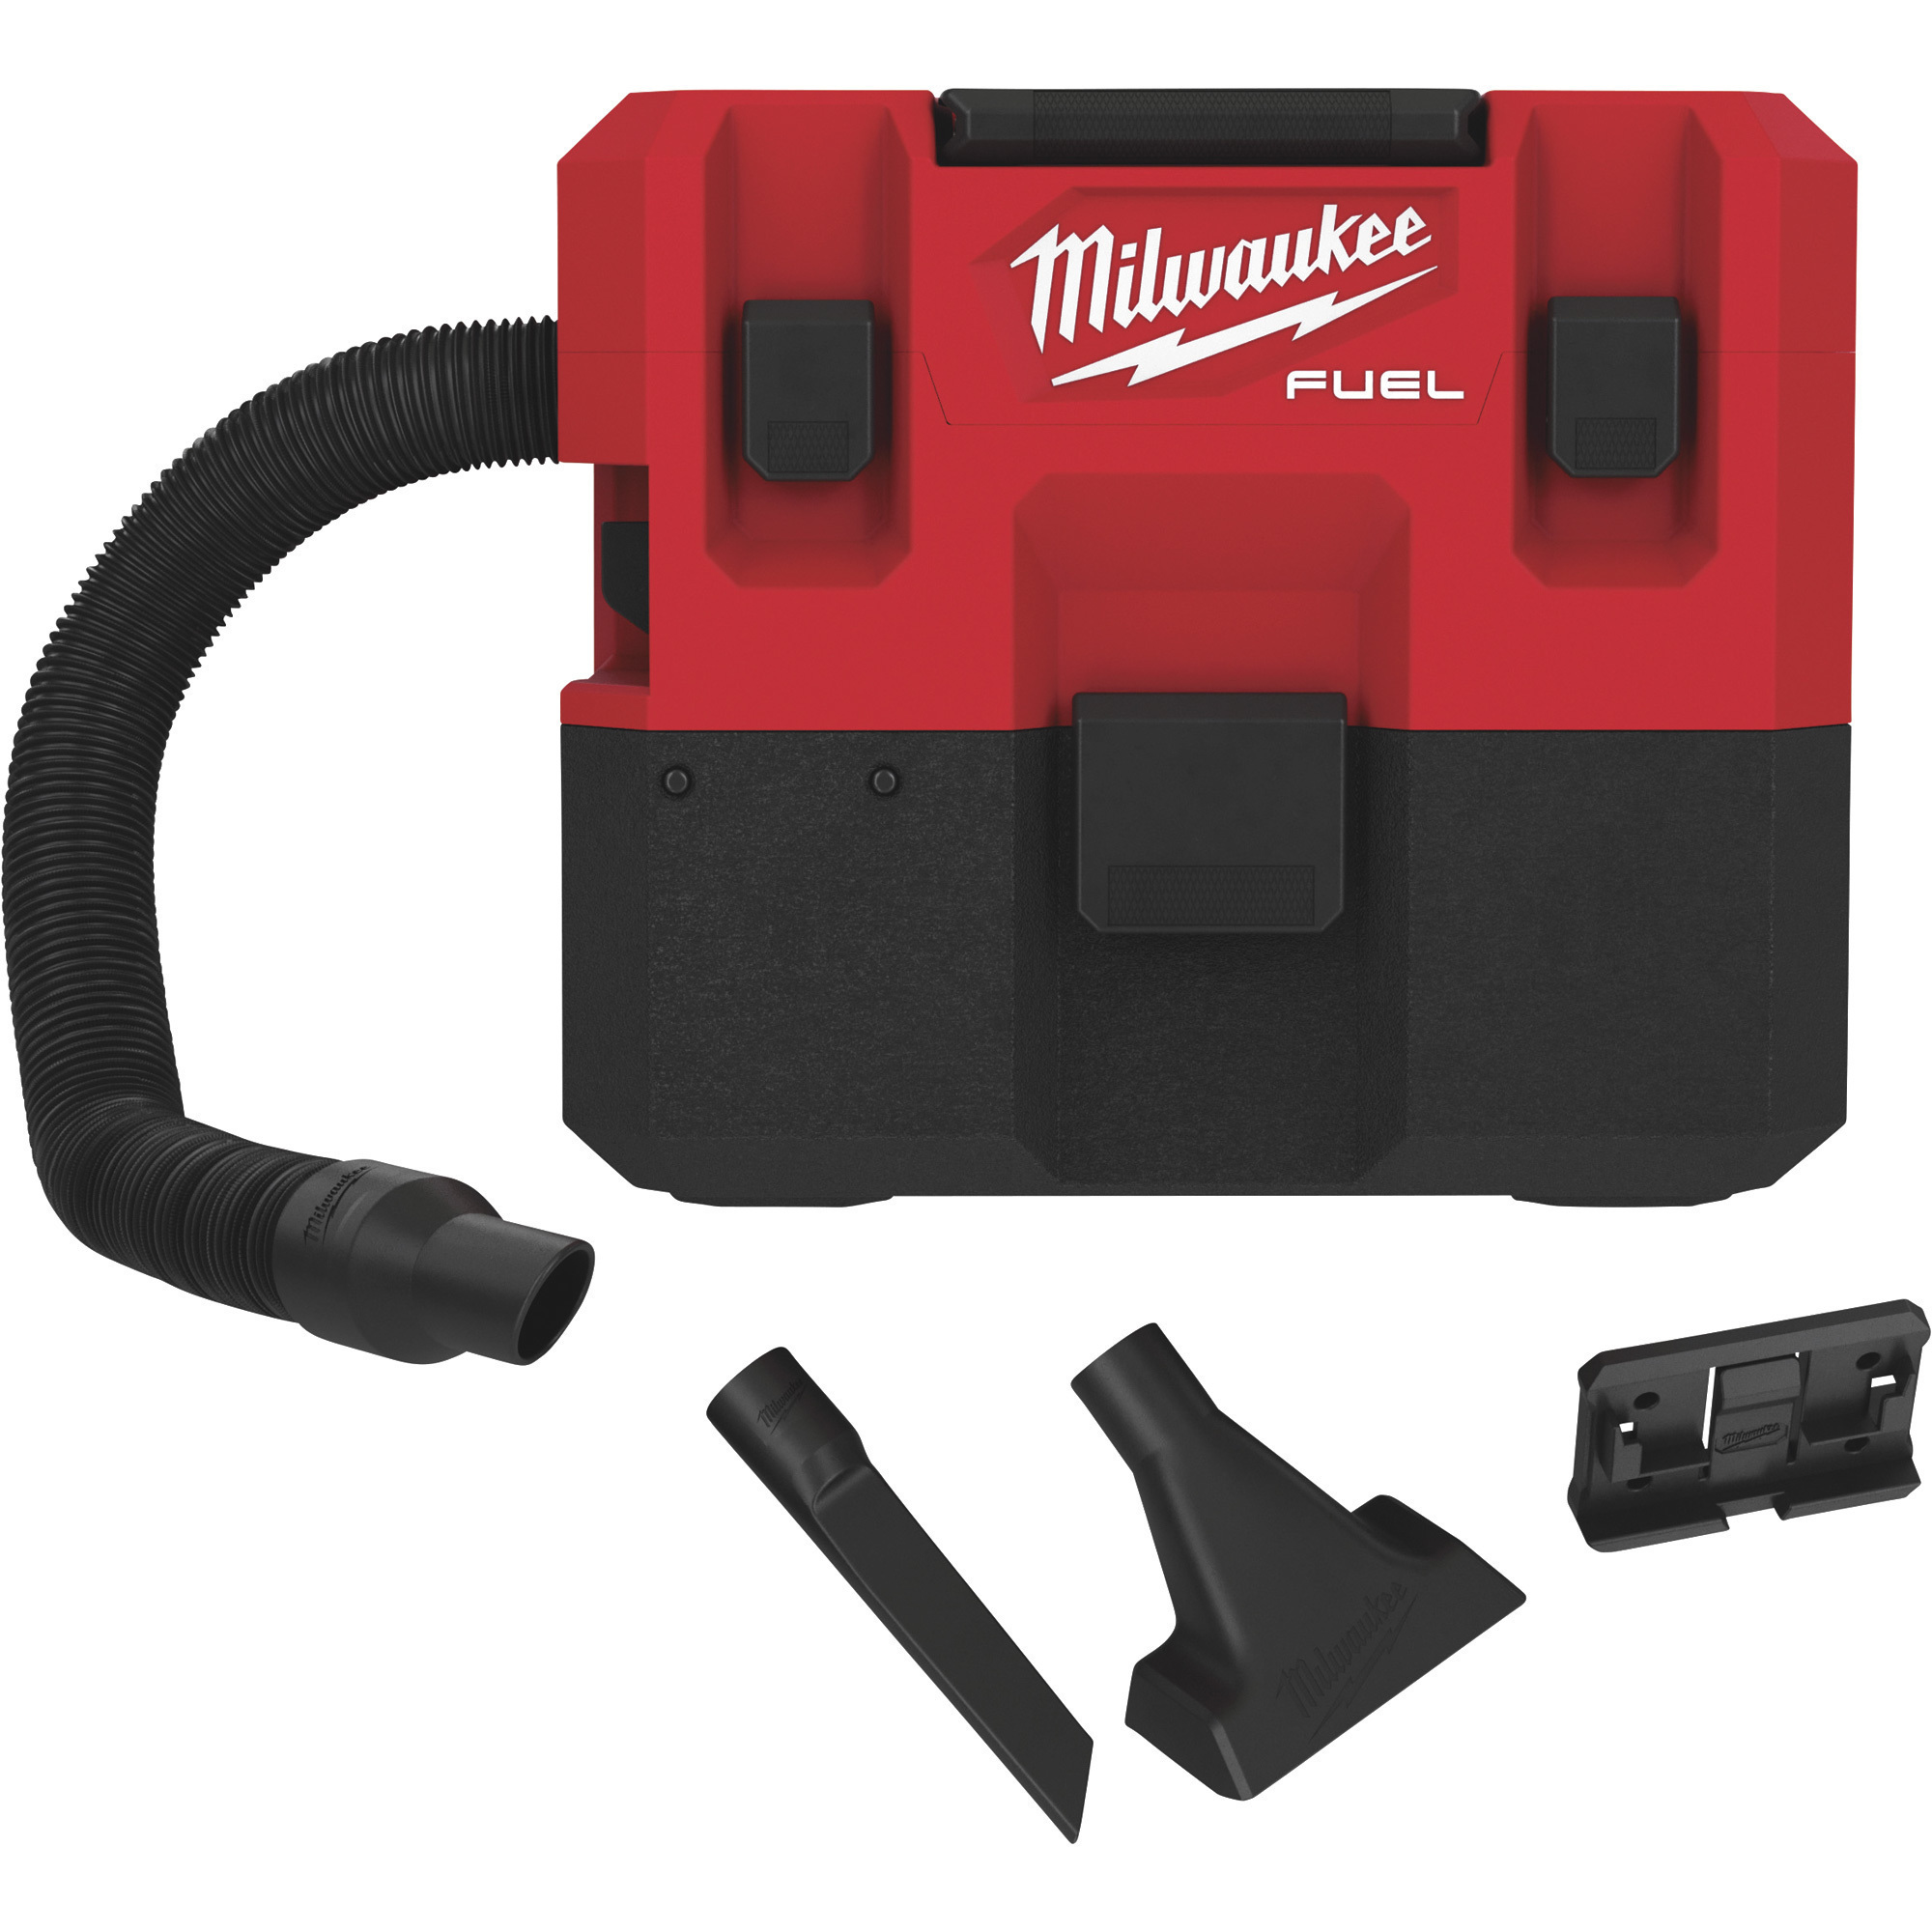 Milwaukee M12 FUEL Cordless 1.6 Gallon Wet/Dry Vacuum, Tool Only, Model 0960-20